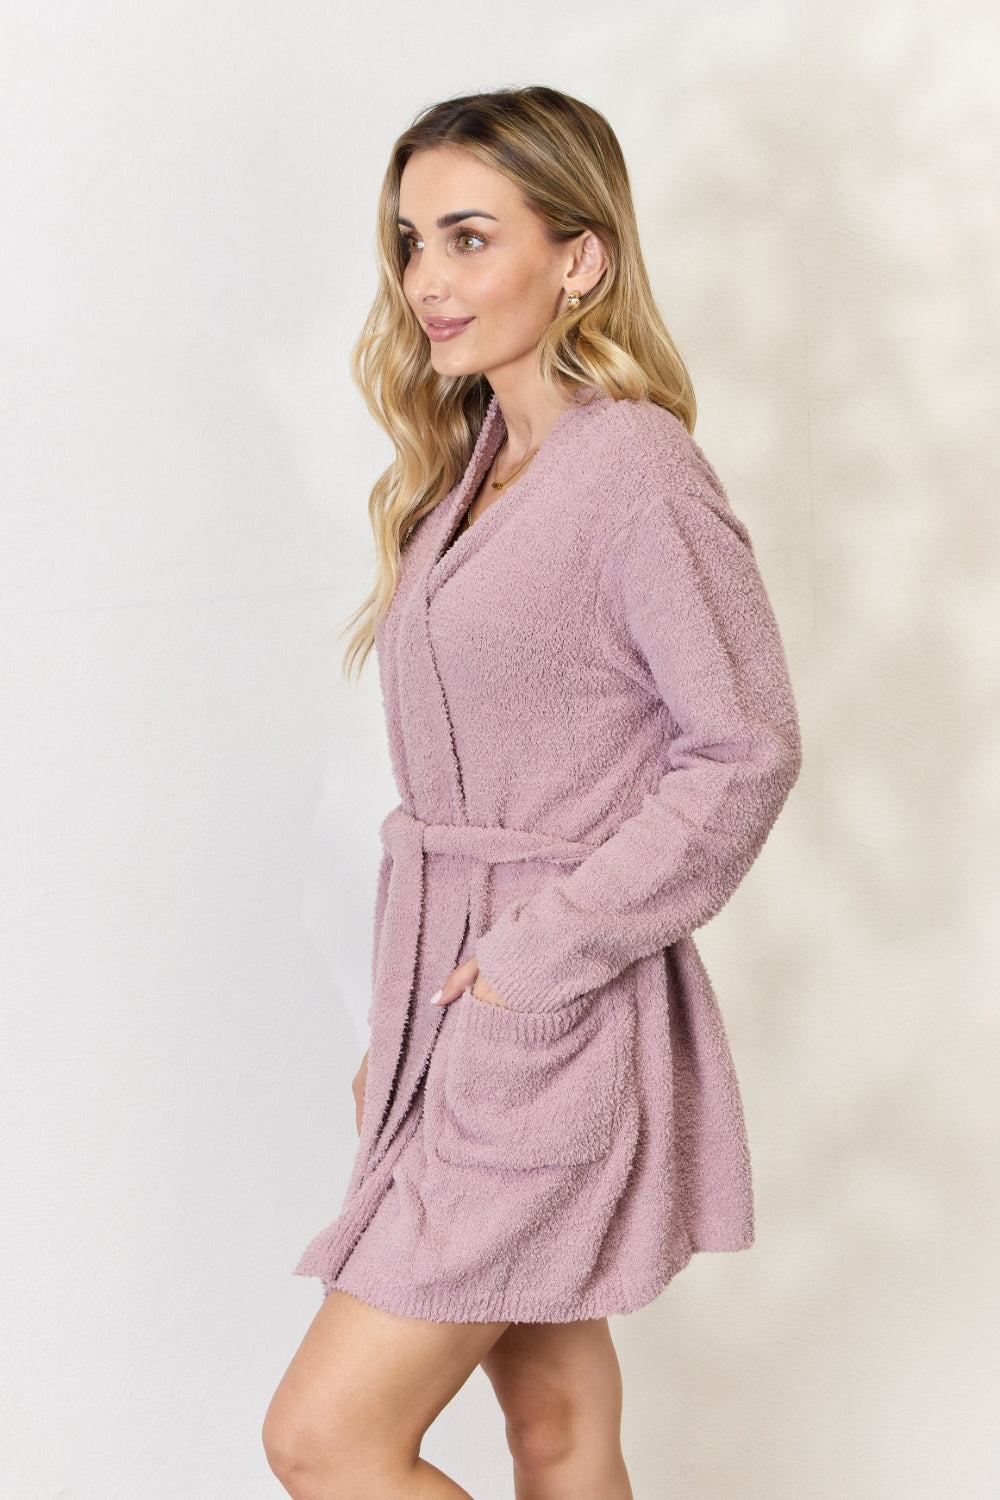 Mauve Tie Front Bath Robe - Inspired Eye Boutique